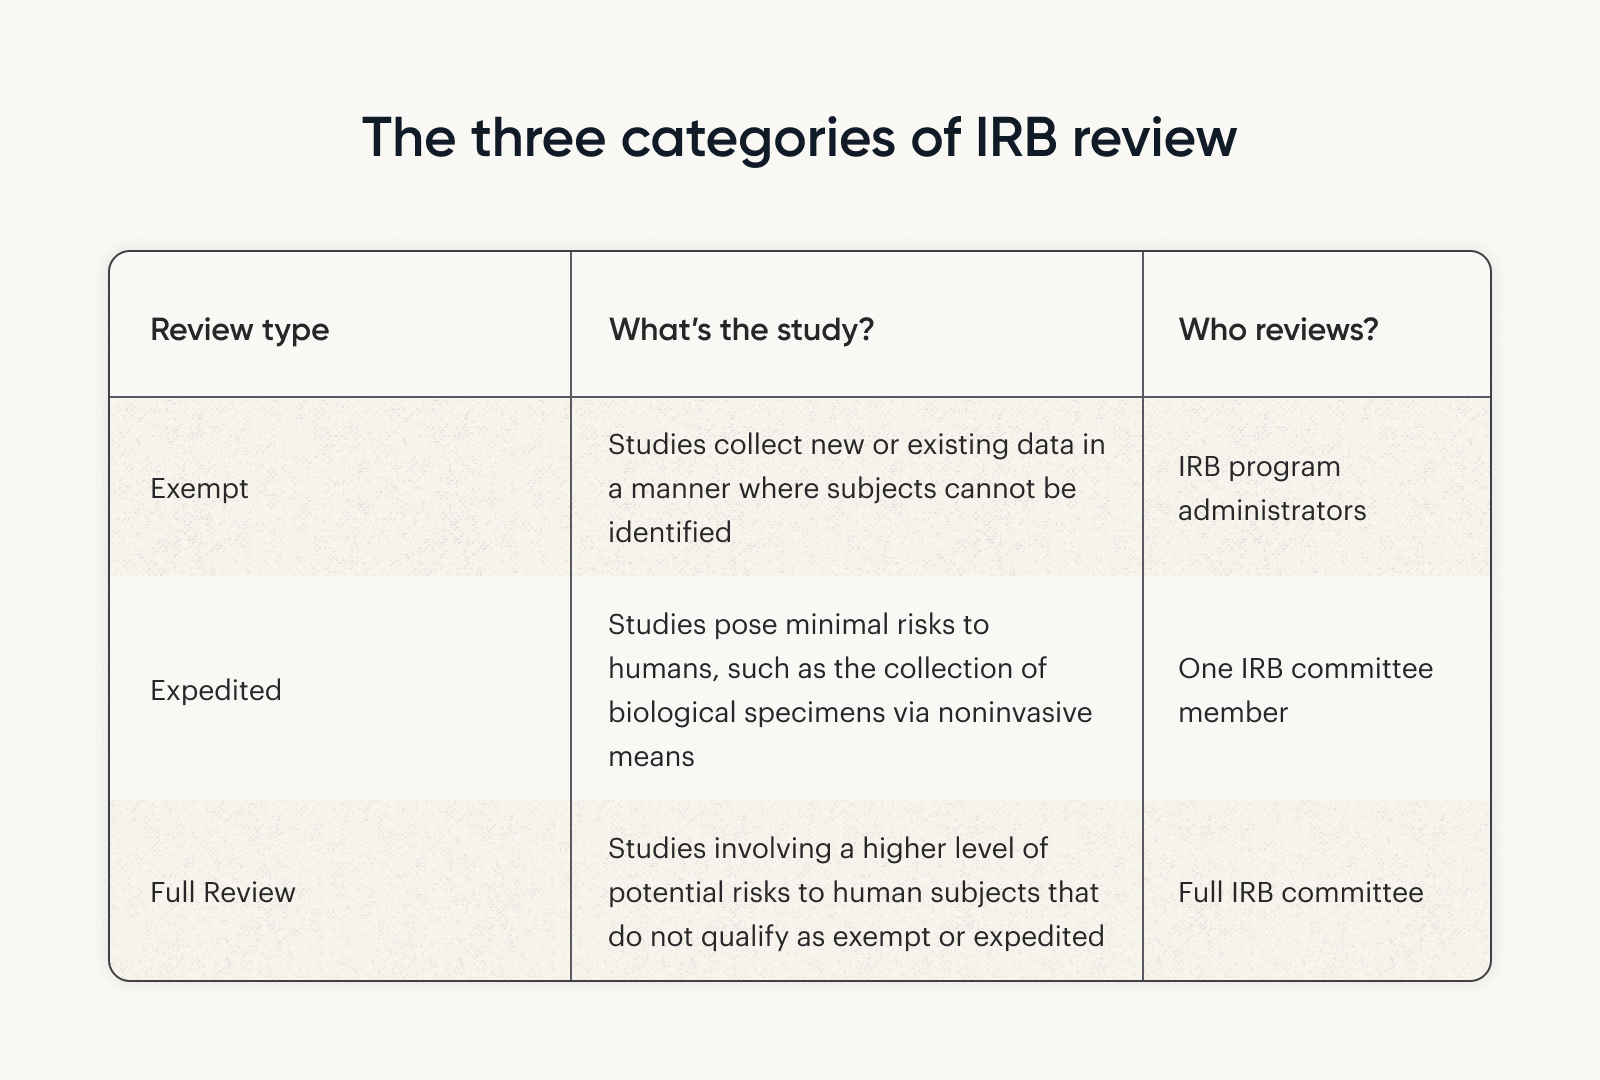 A chart displaying the three categories of IRB review: exempt, expedited, and full review.